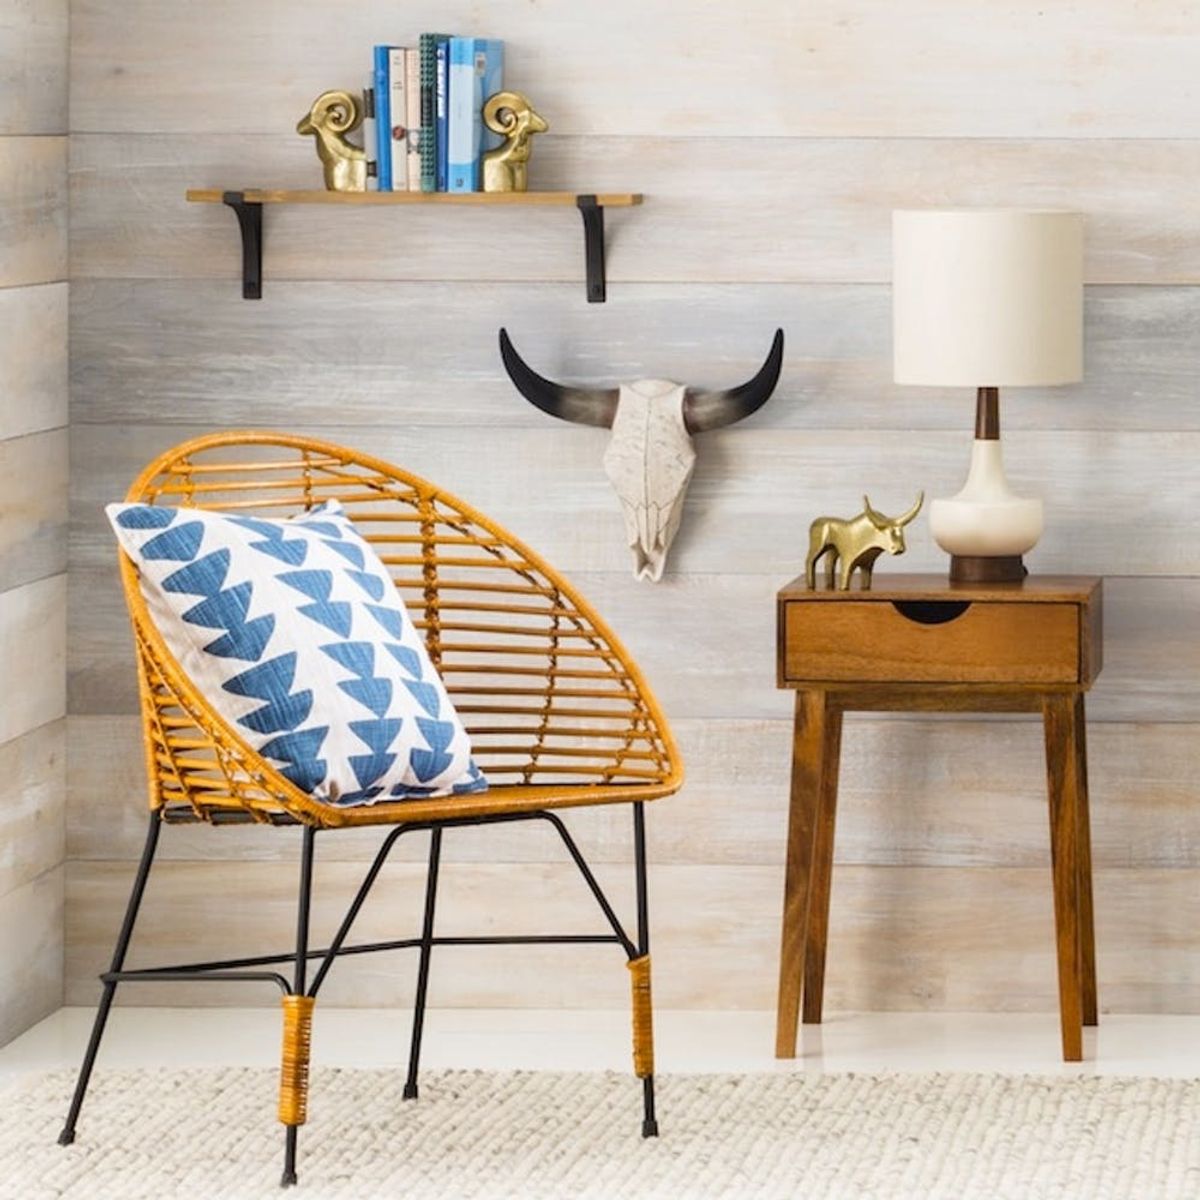 Target’s Latest Home Collection Is Wild West Chic